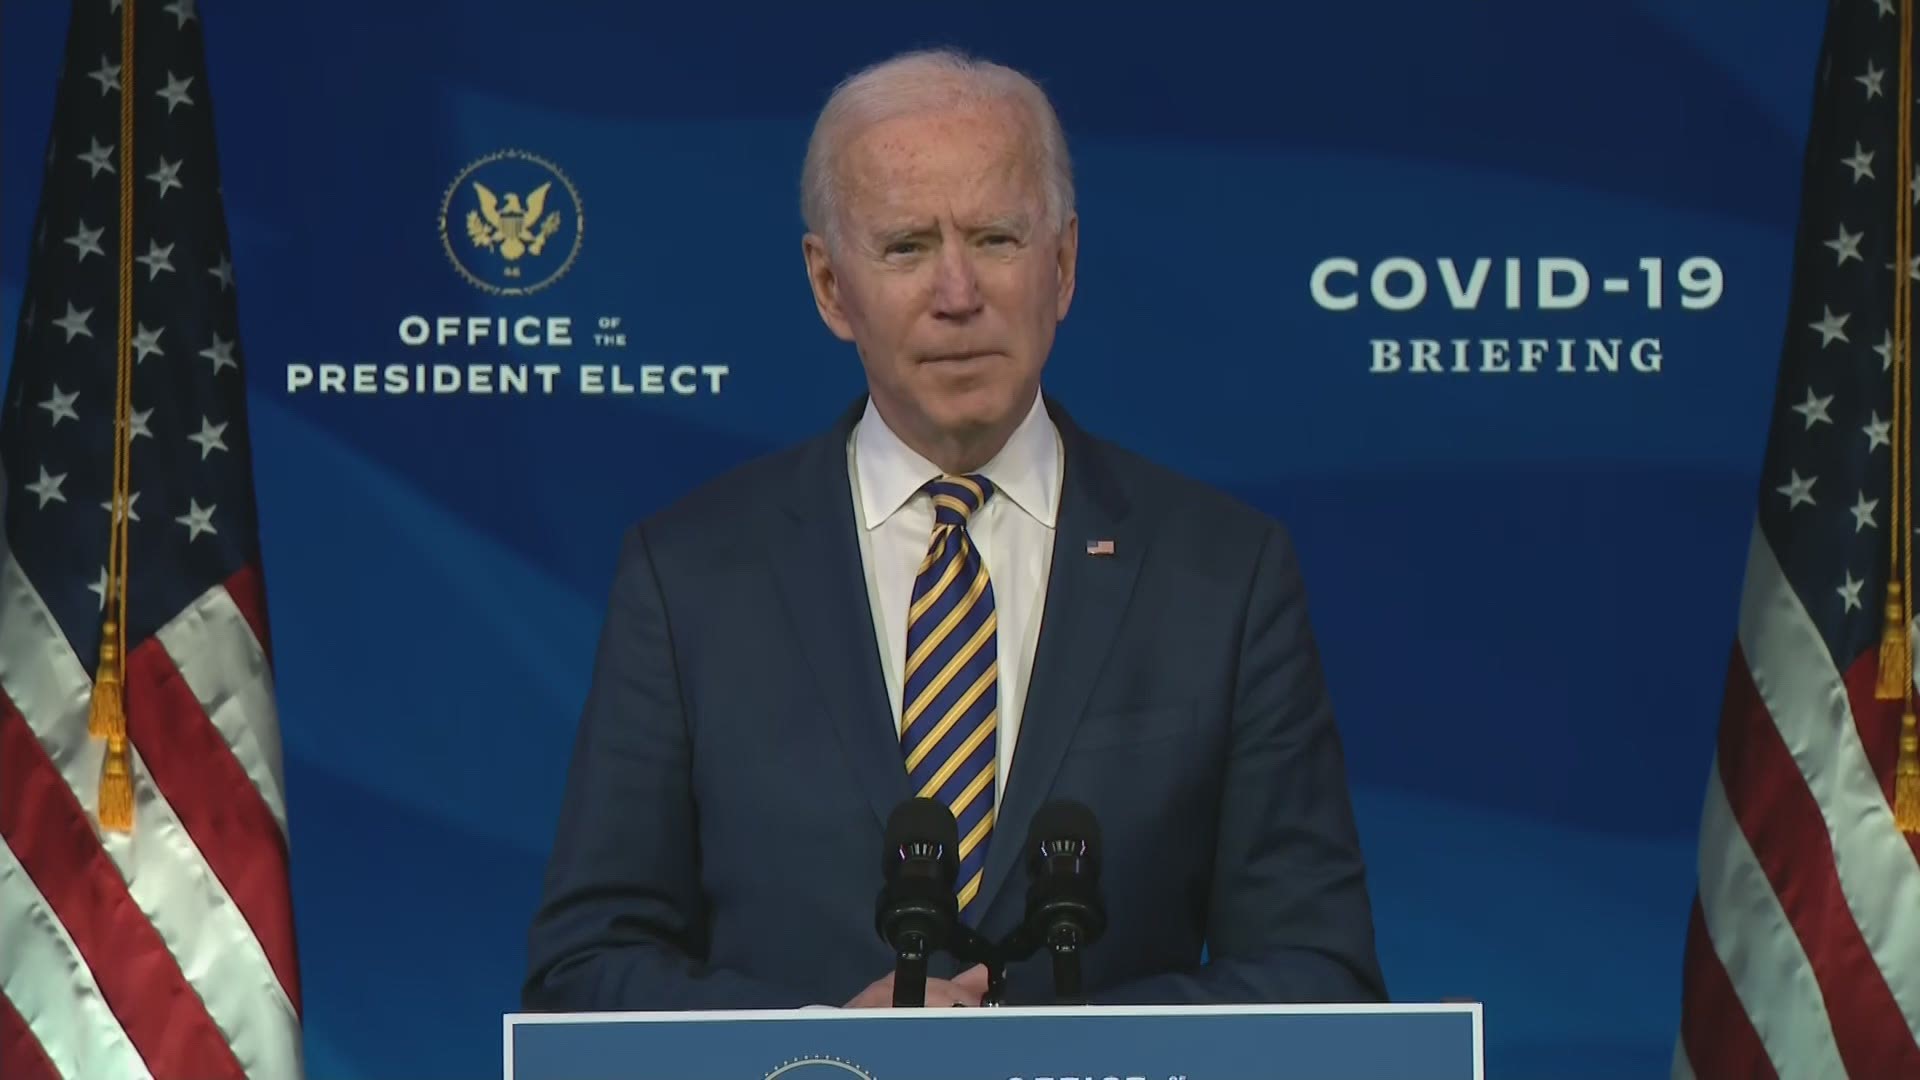 President-elect Joe Biden delivered remarks Tuesday discussing the ongoing coronavirus pandemic and the slower-than-expected rollout of vaccines.